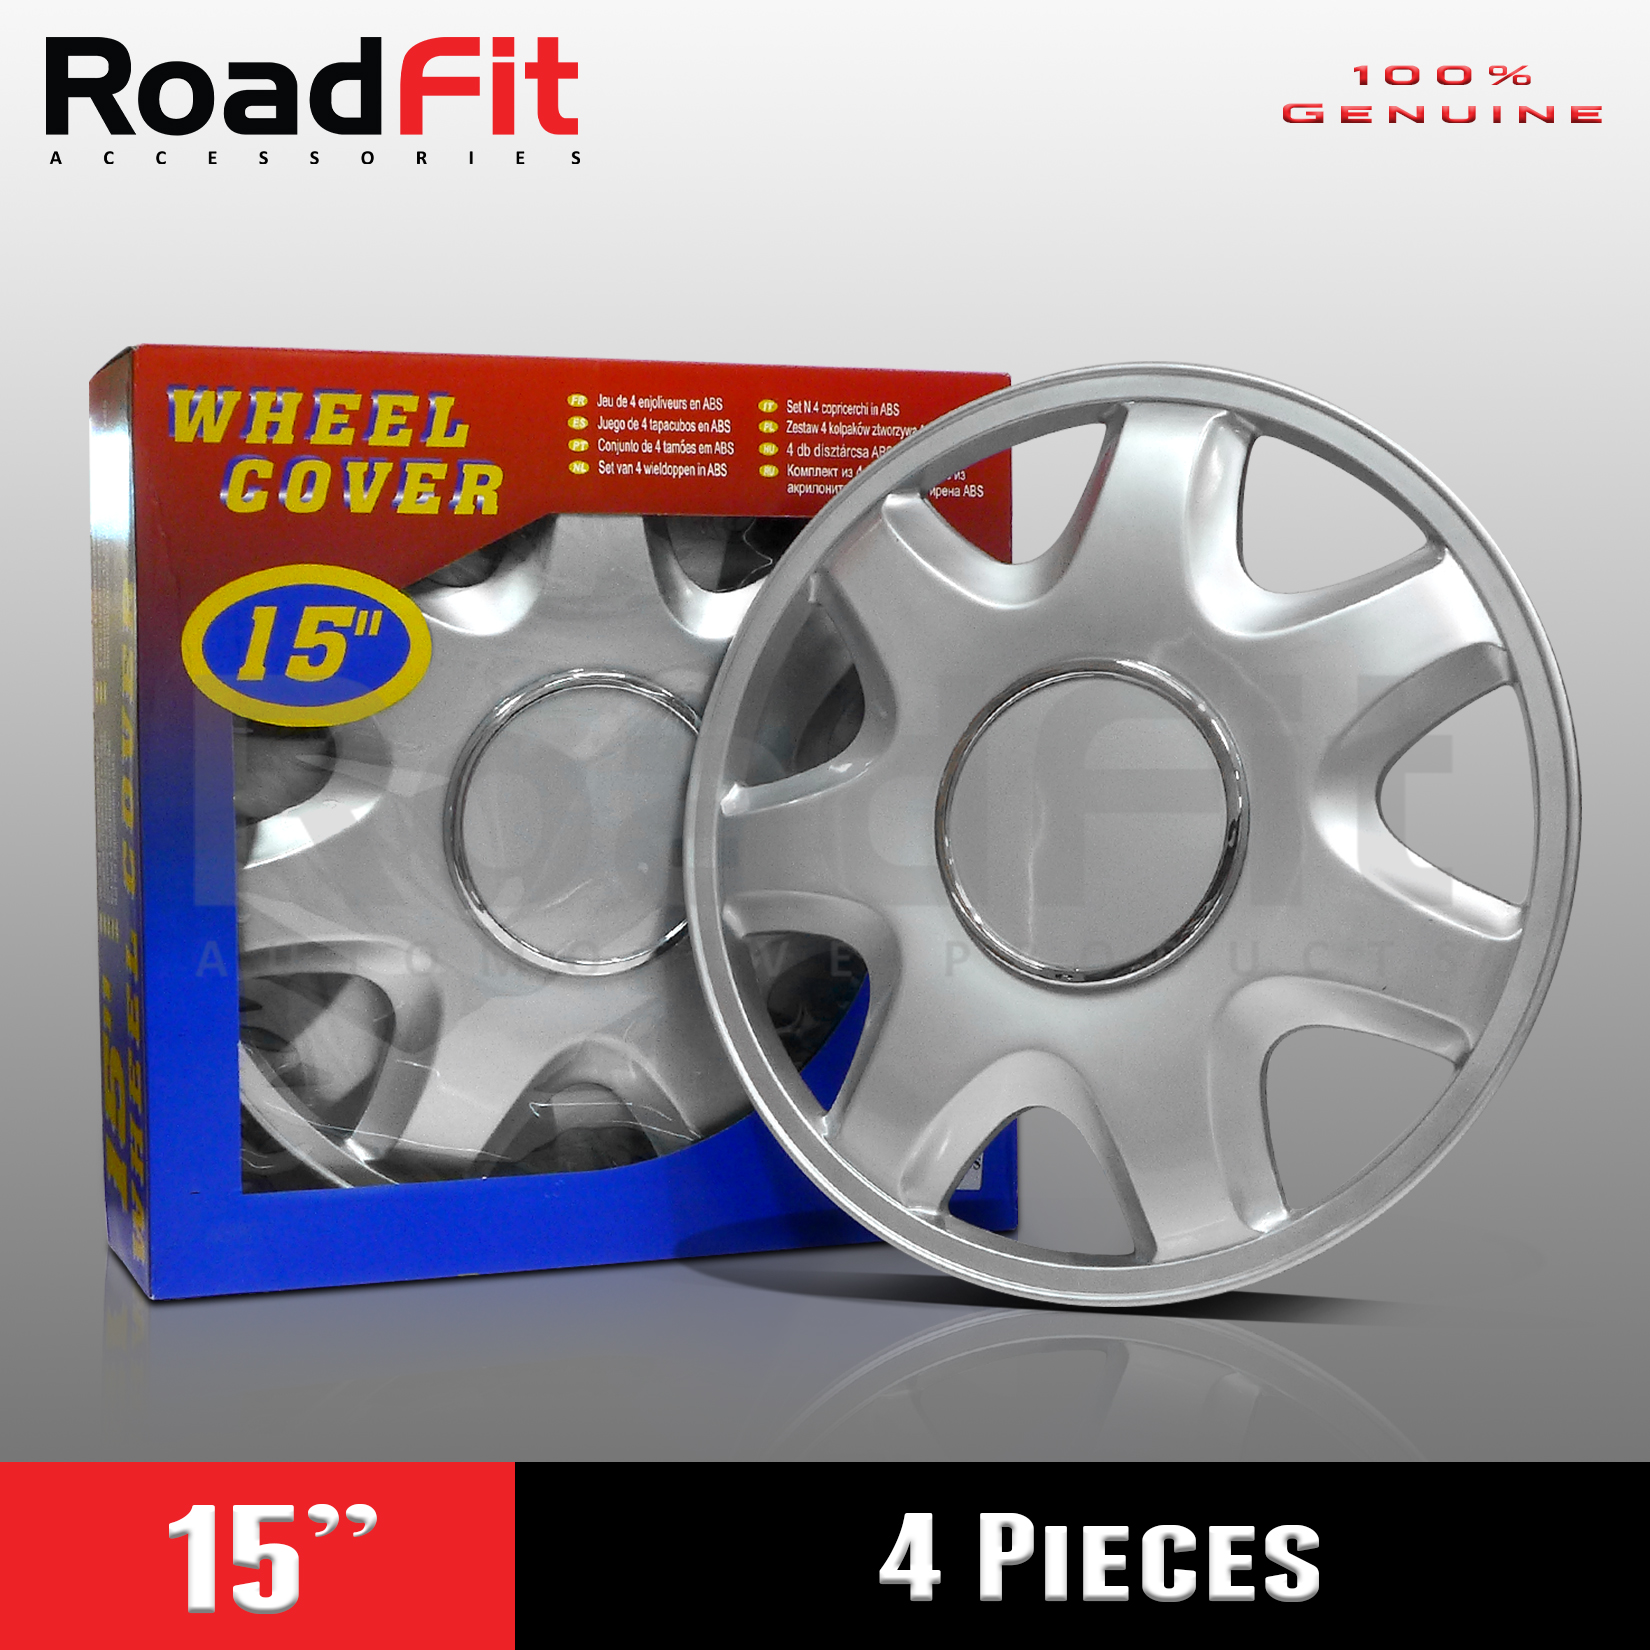 Shop 15 Inches Wheel Cover online